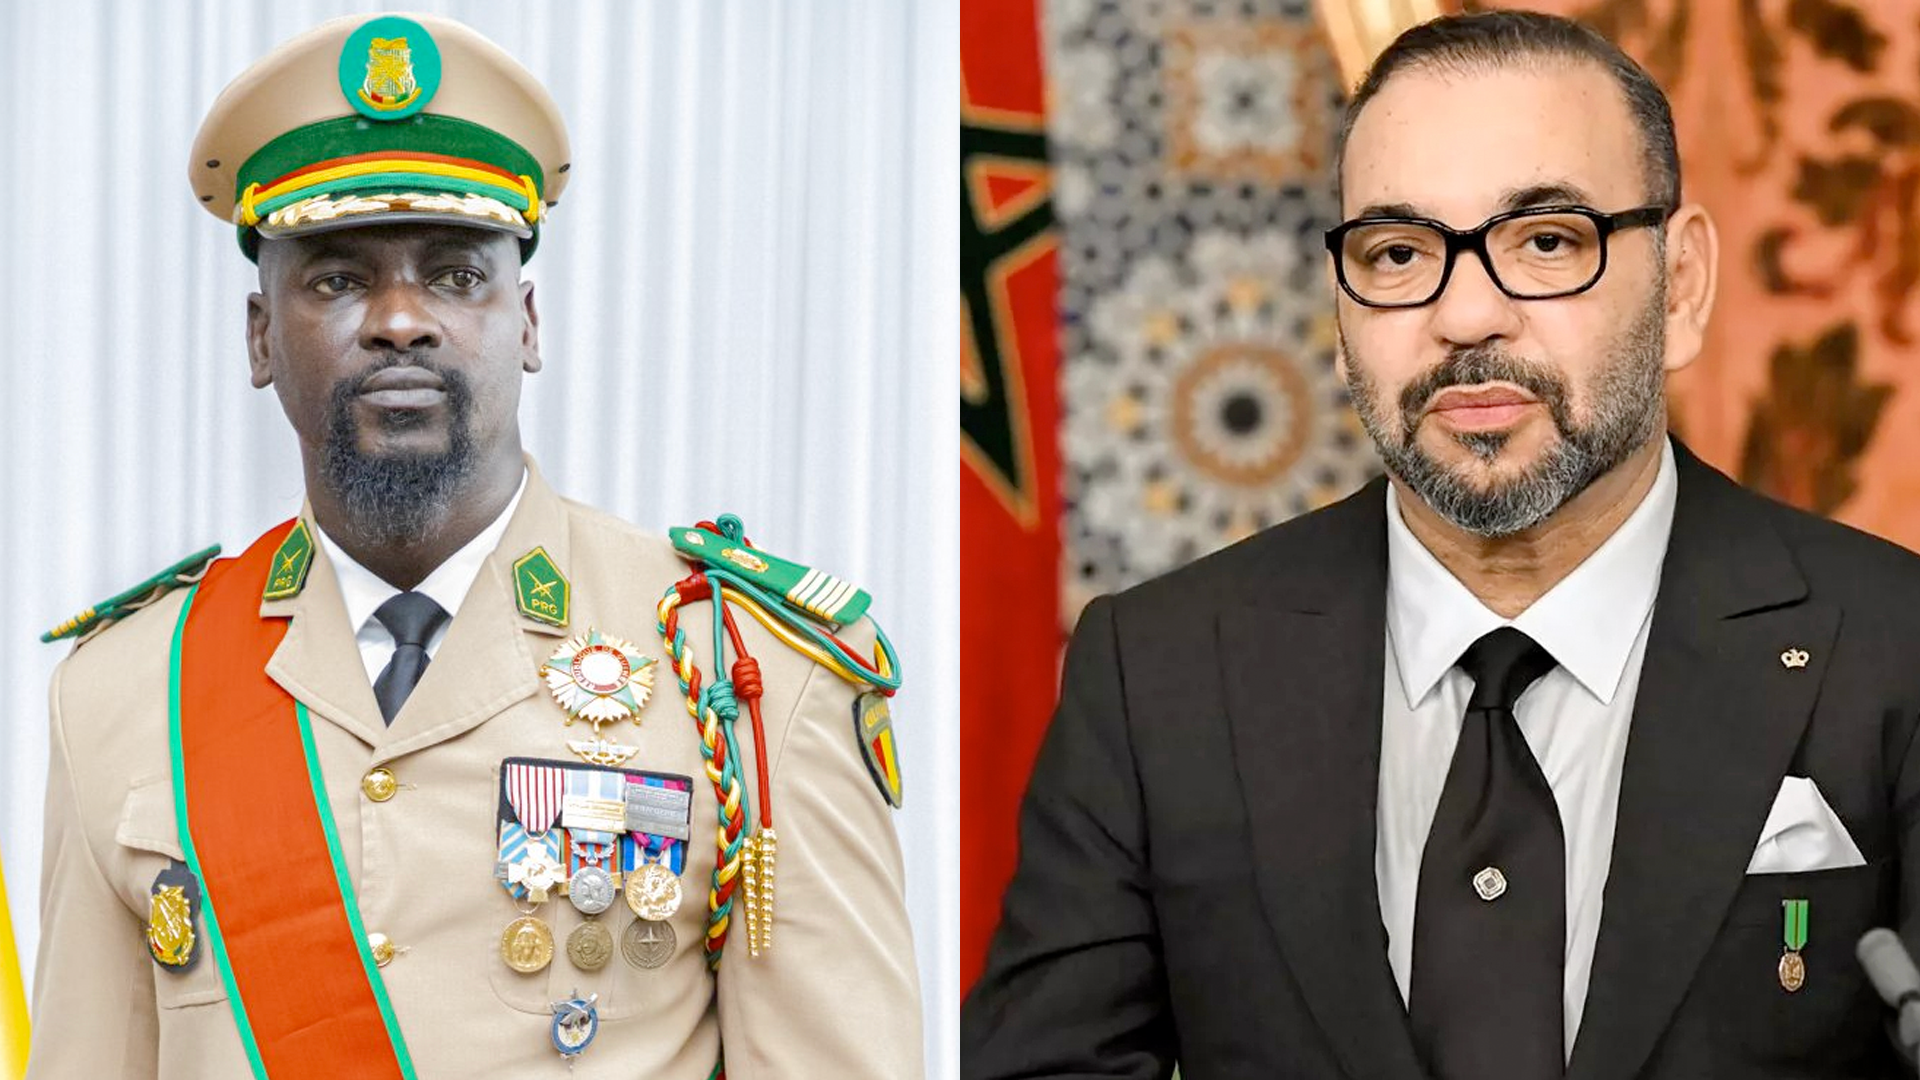 King Mohammed VI expresses Morocco’s readiness to bolster brotherly, age-old ties with Guinea